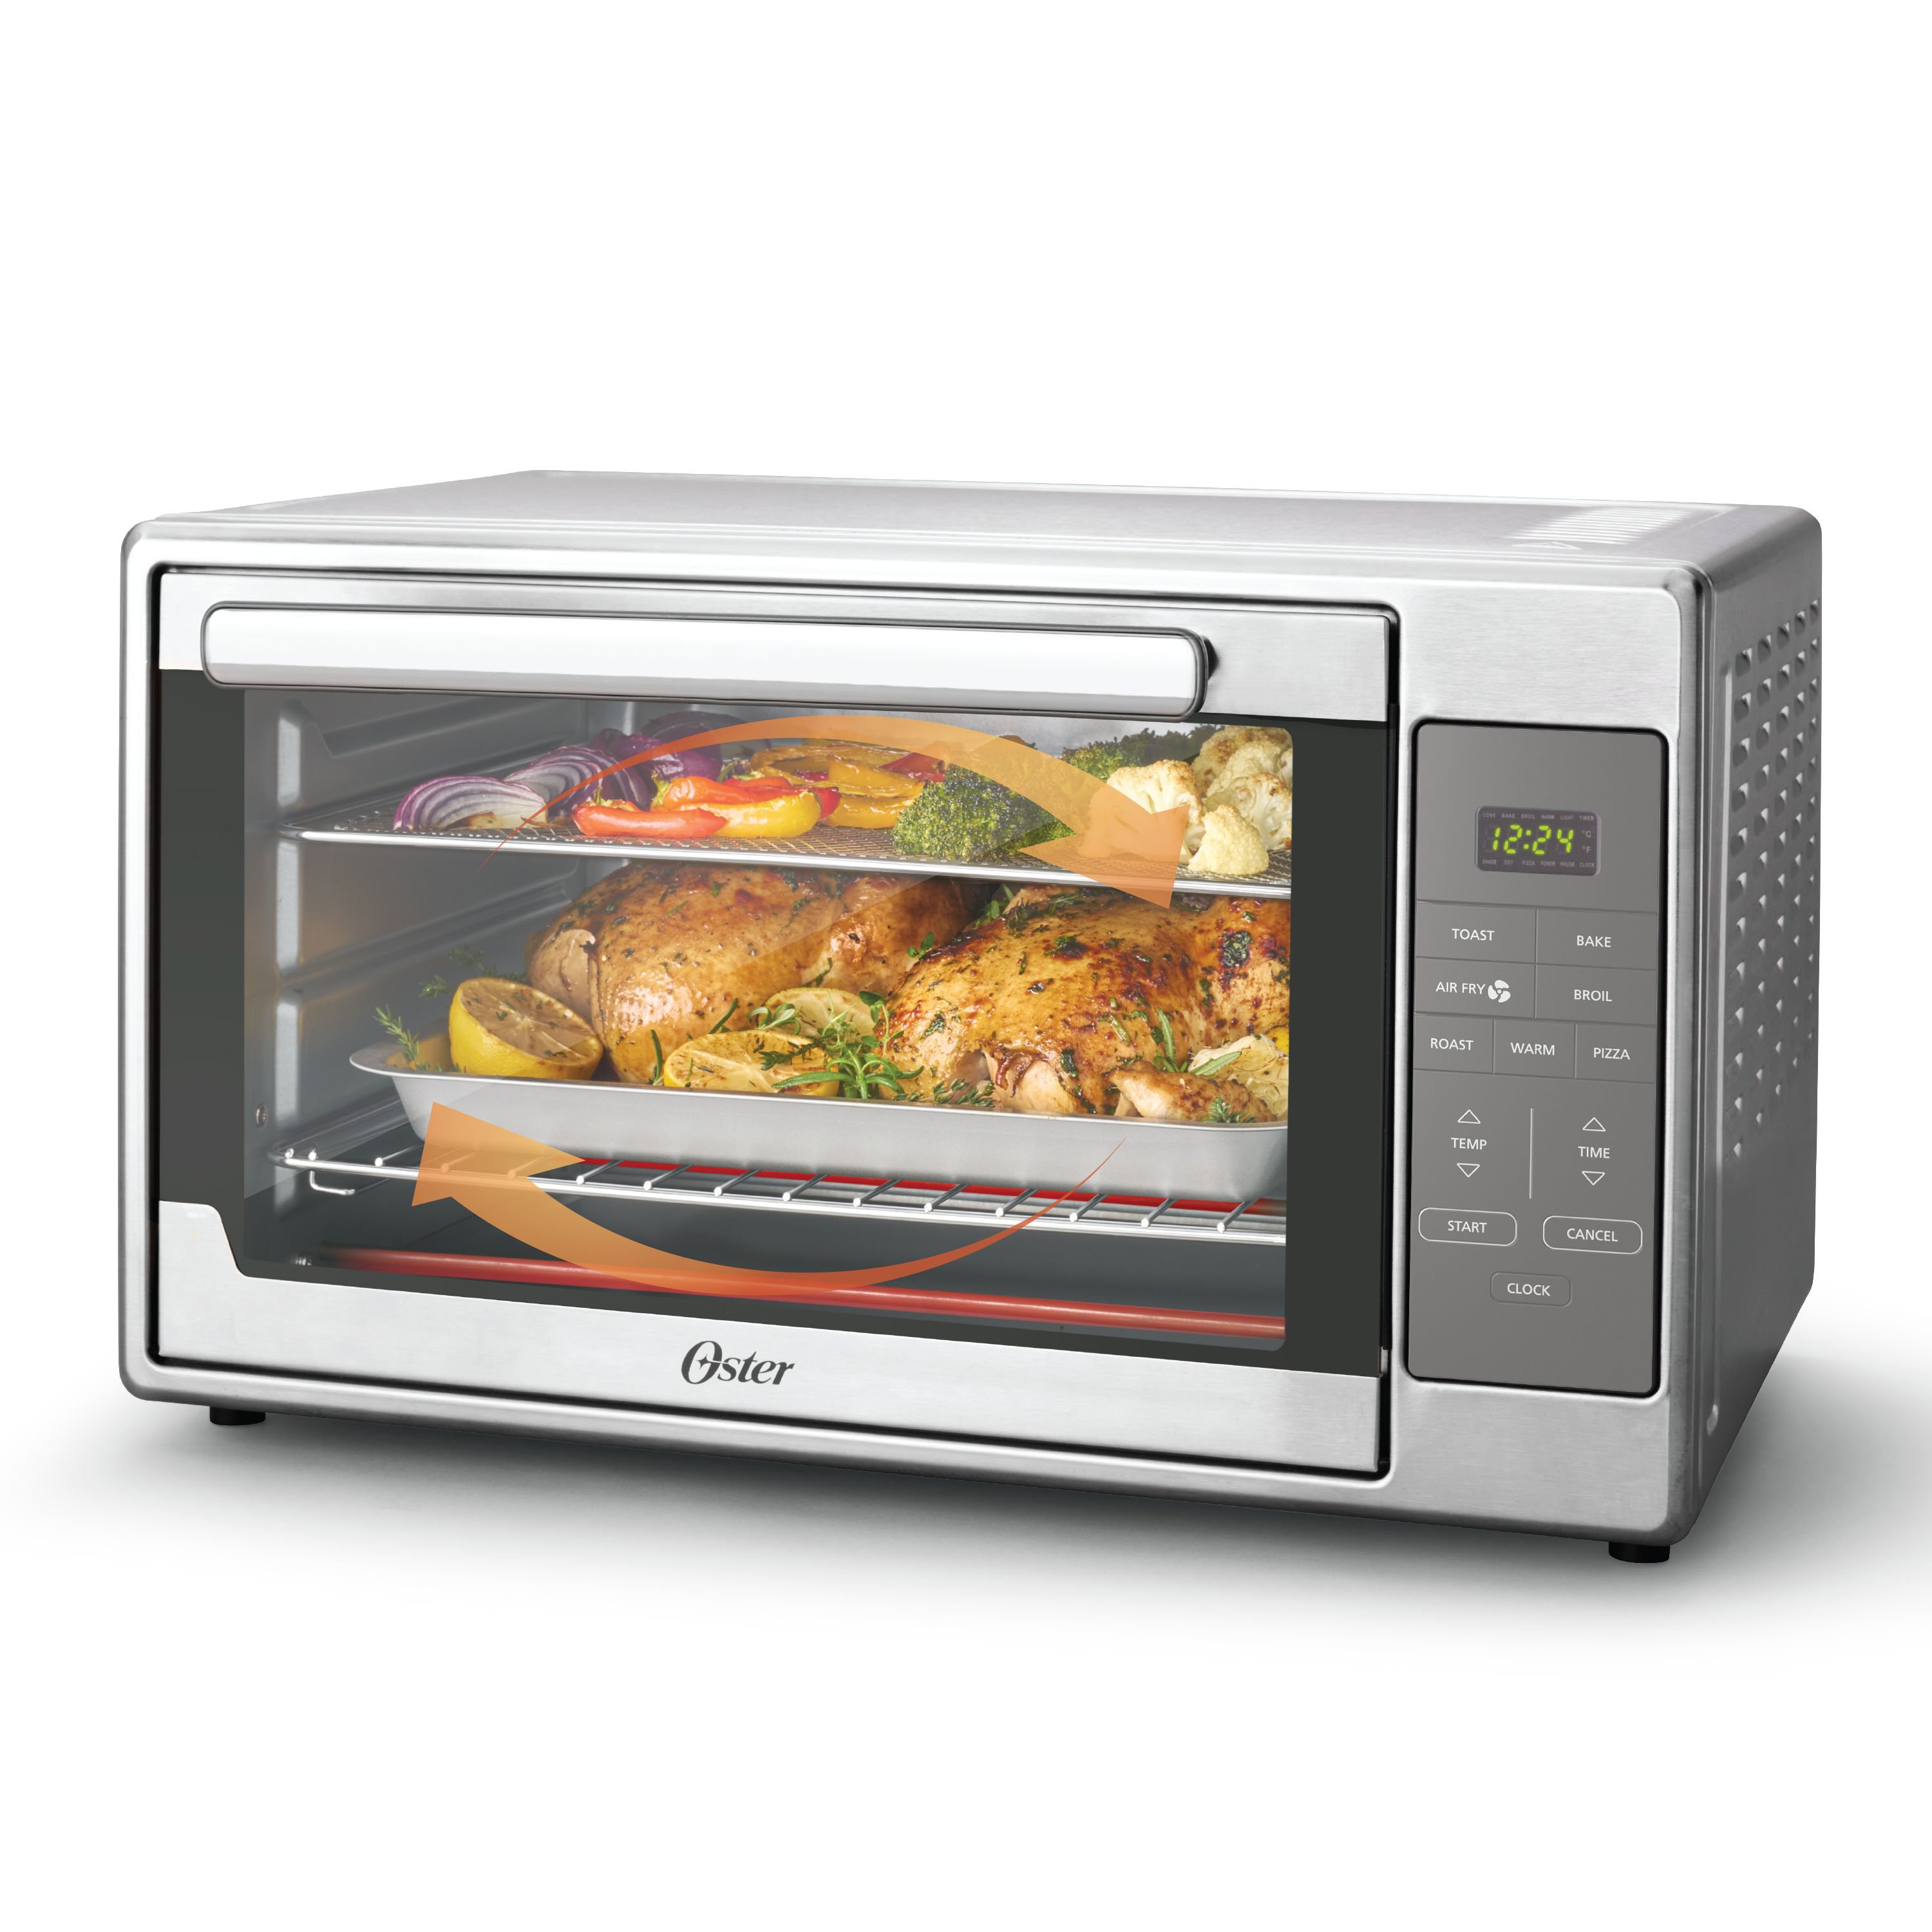 Details about   Oster Extra Large Digital Countertop Convection Oven Stainless Steel 